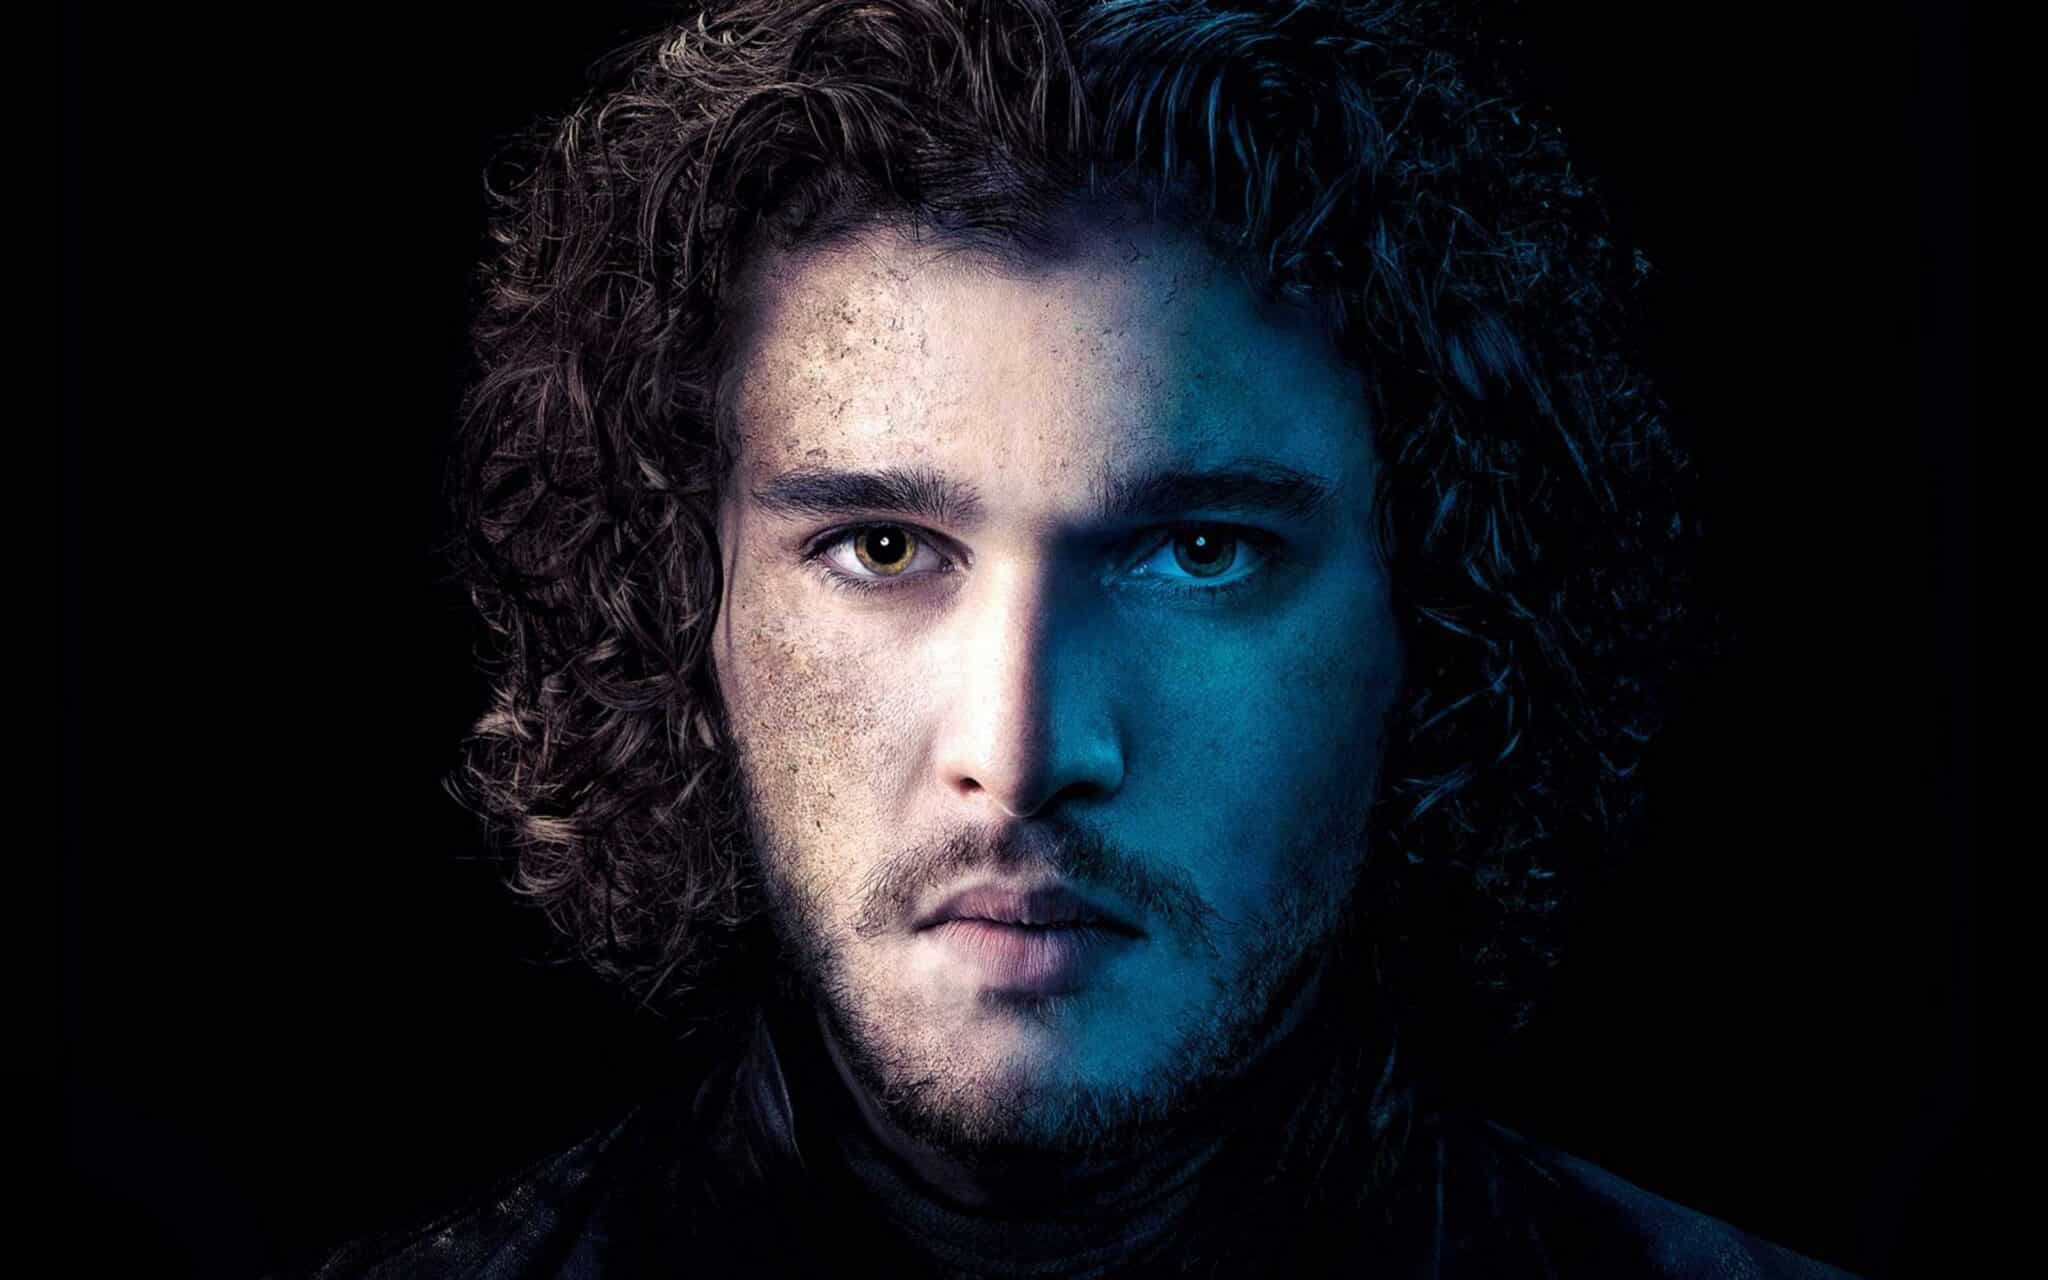 Will The Jon Snow Show Answer A Plethora of Unanswered Questions?